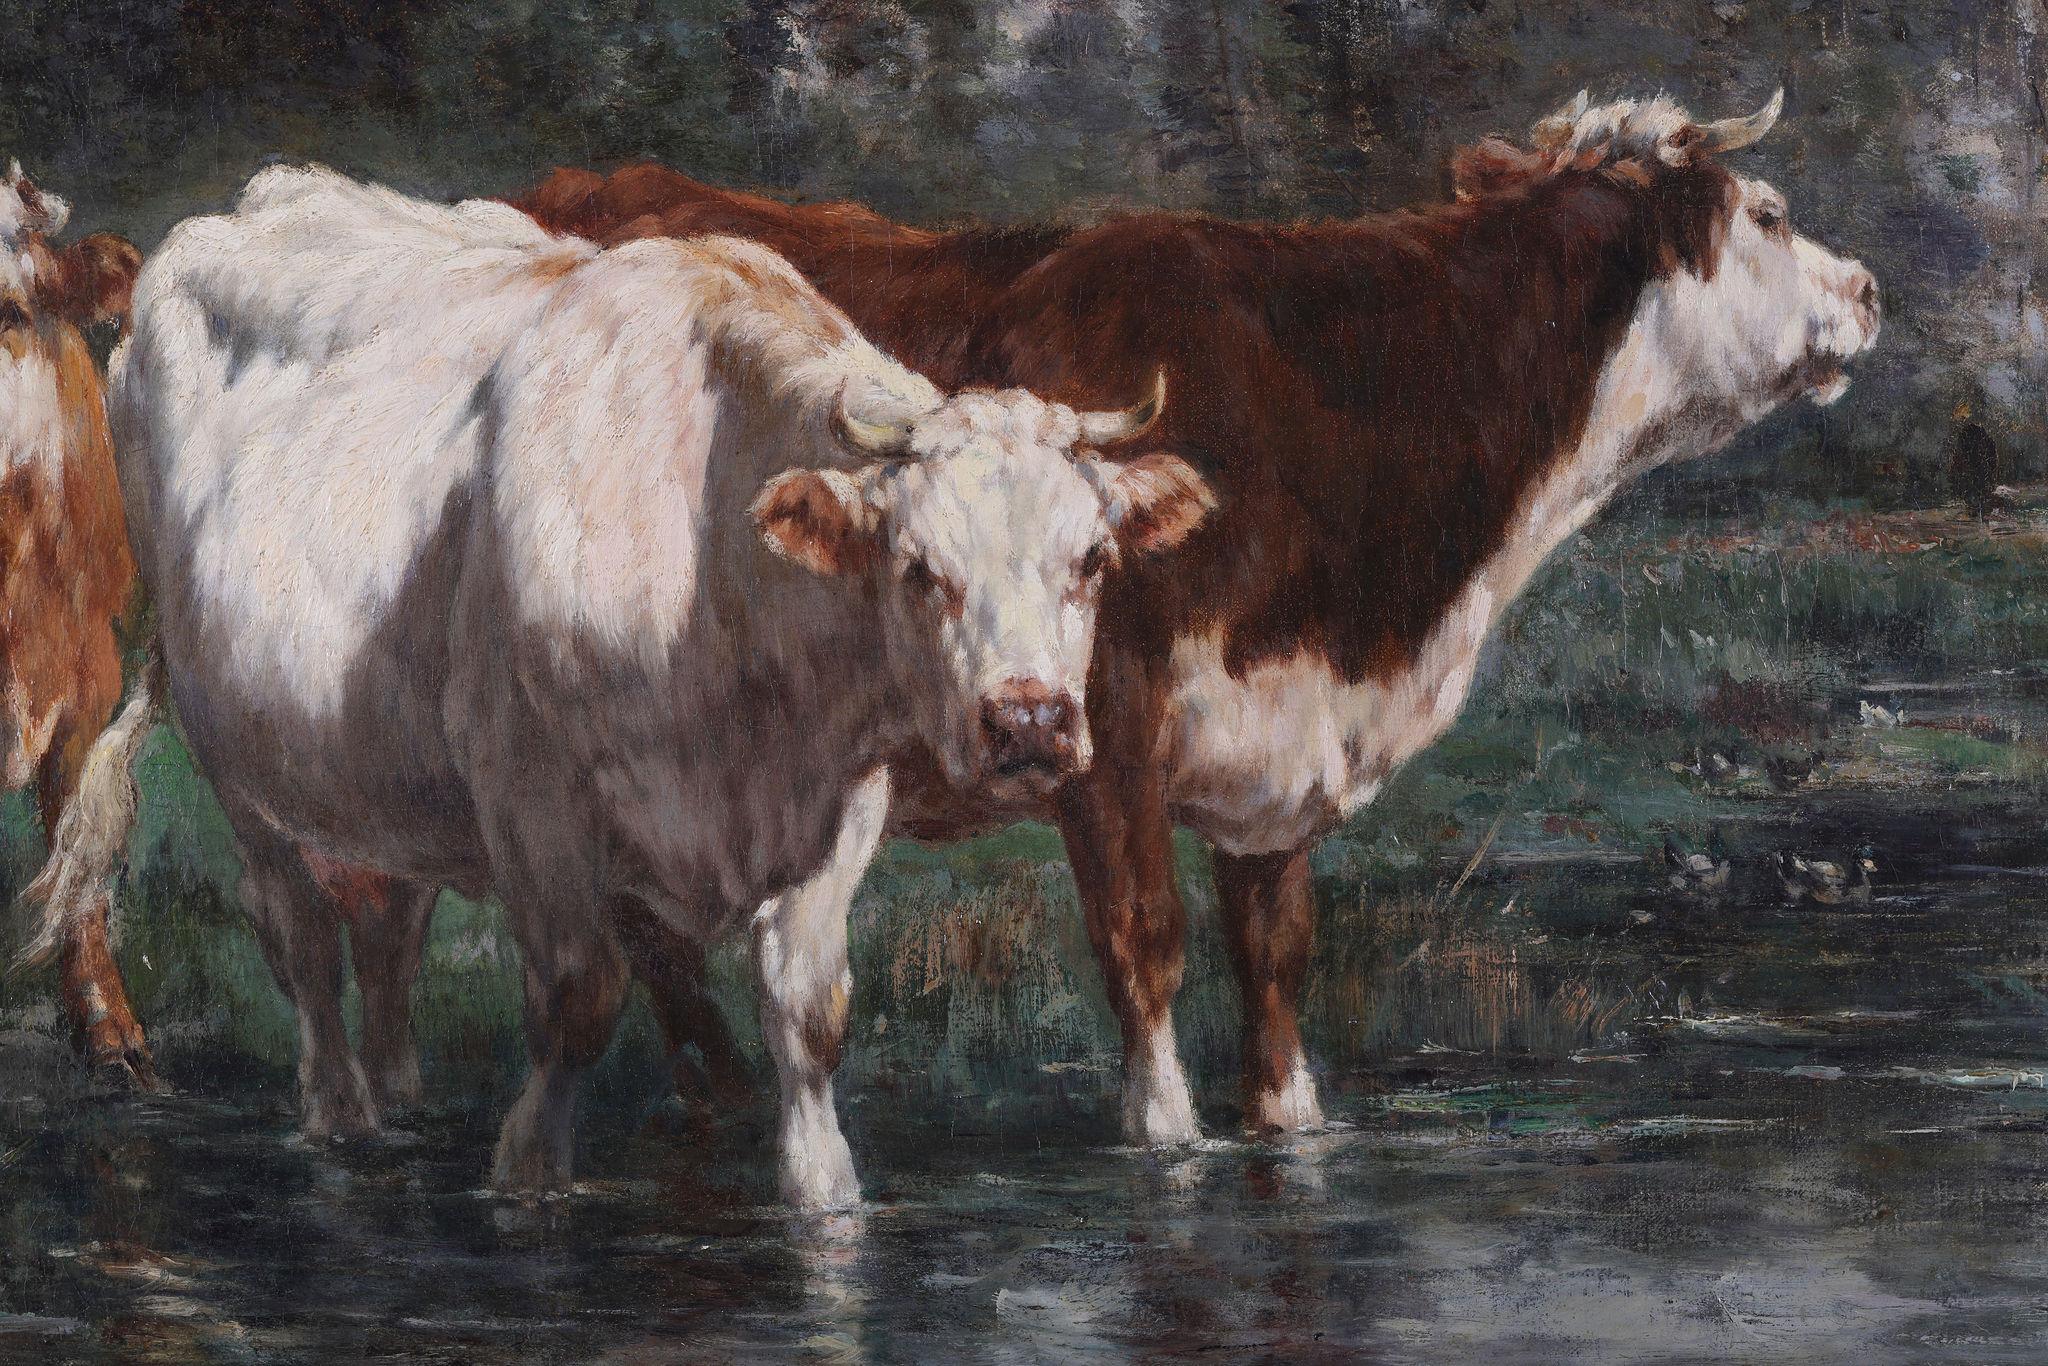 Cattle by a River. Oil on Canvas - Barbizon School Painting by Marie Dieterle